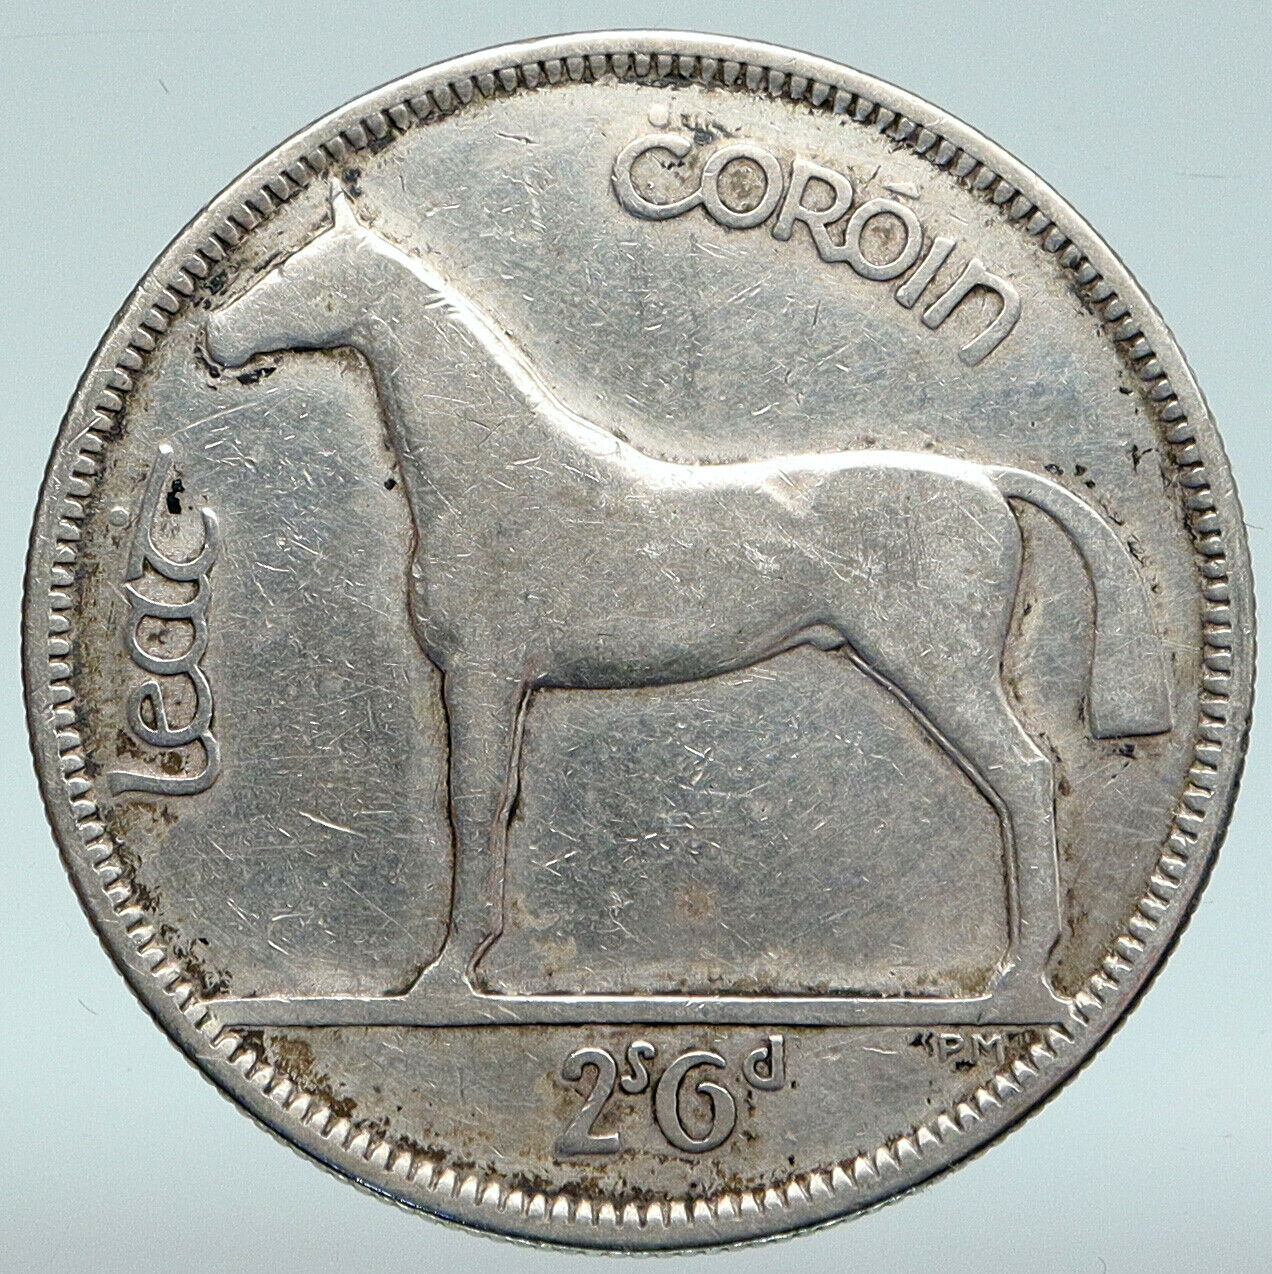 1928 IRELAND Silver HORSE and LYRE HARP Vintage OLD Antique IRISH 2S Coin i89364